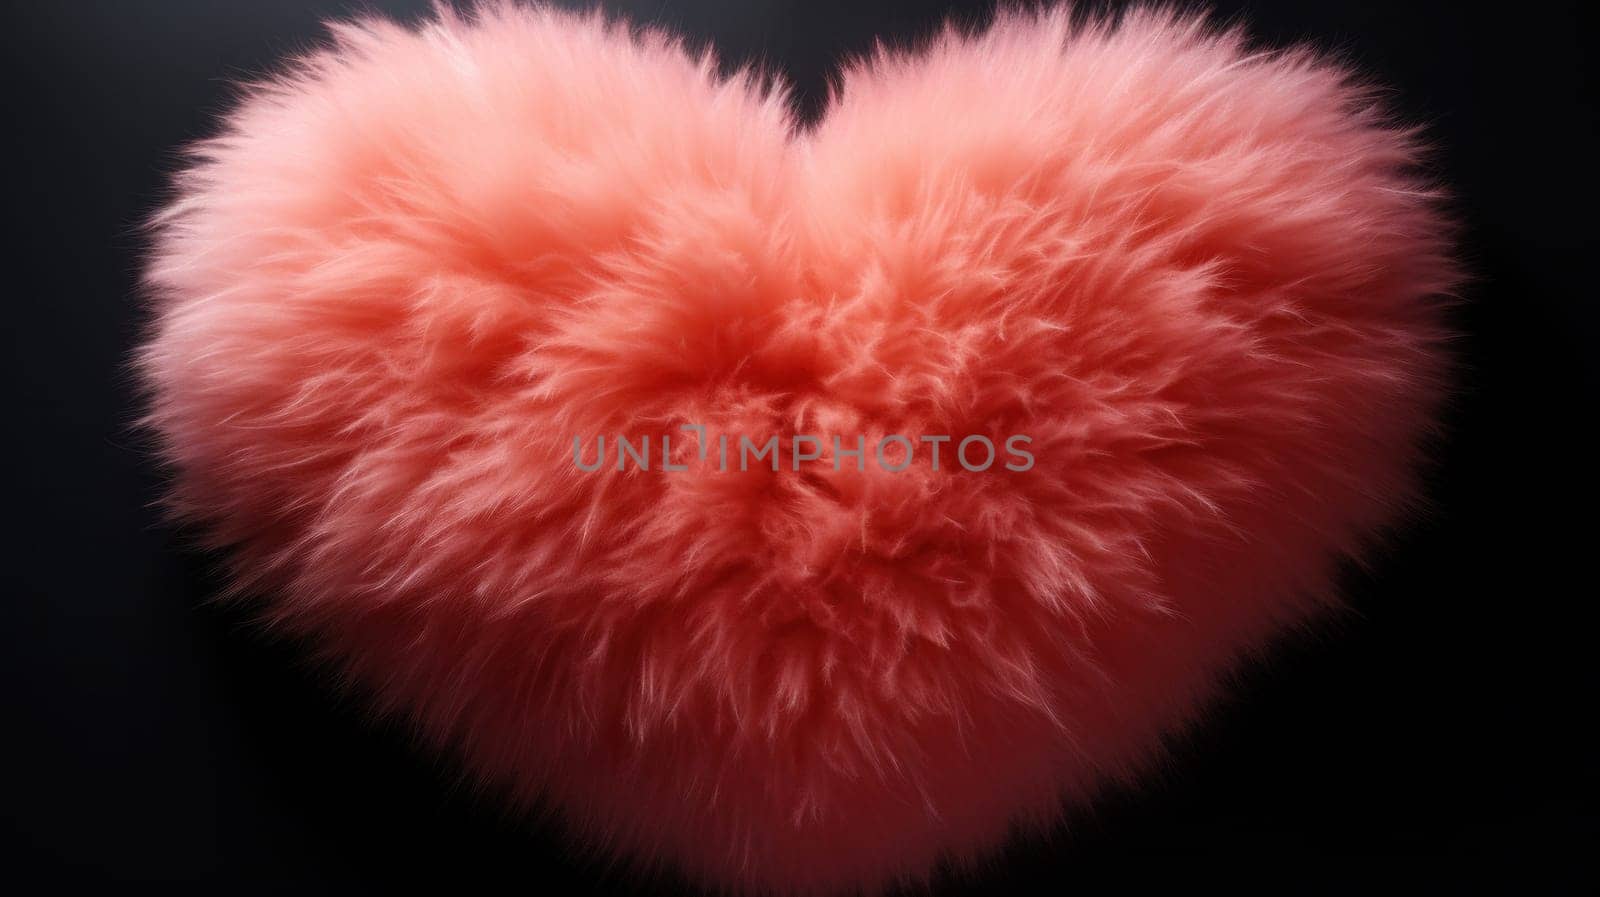 A large fluffy heart shaped object on a black background